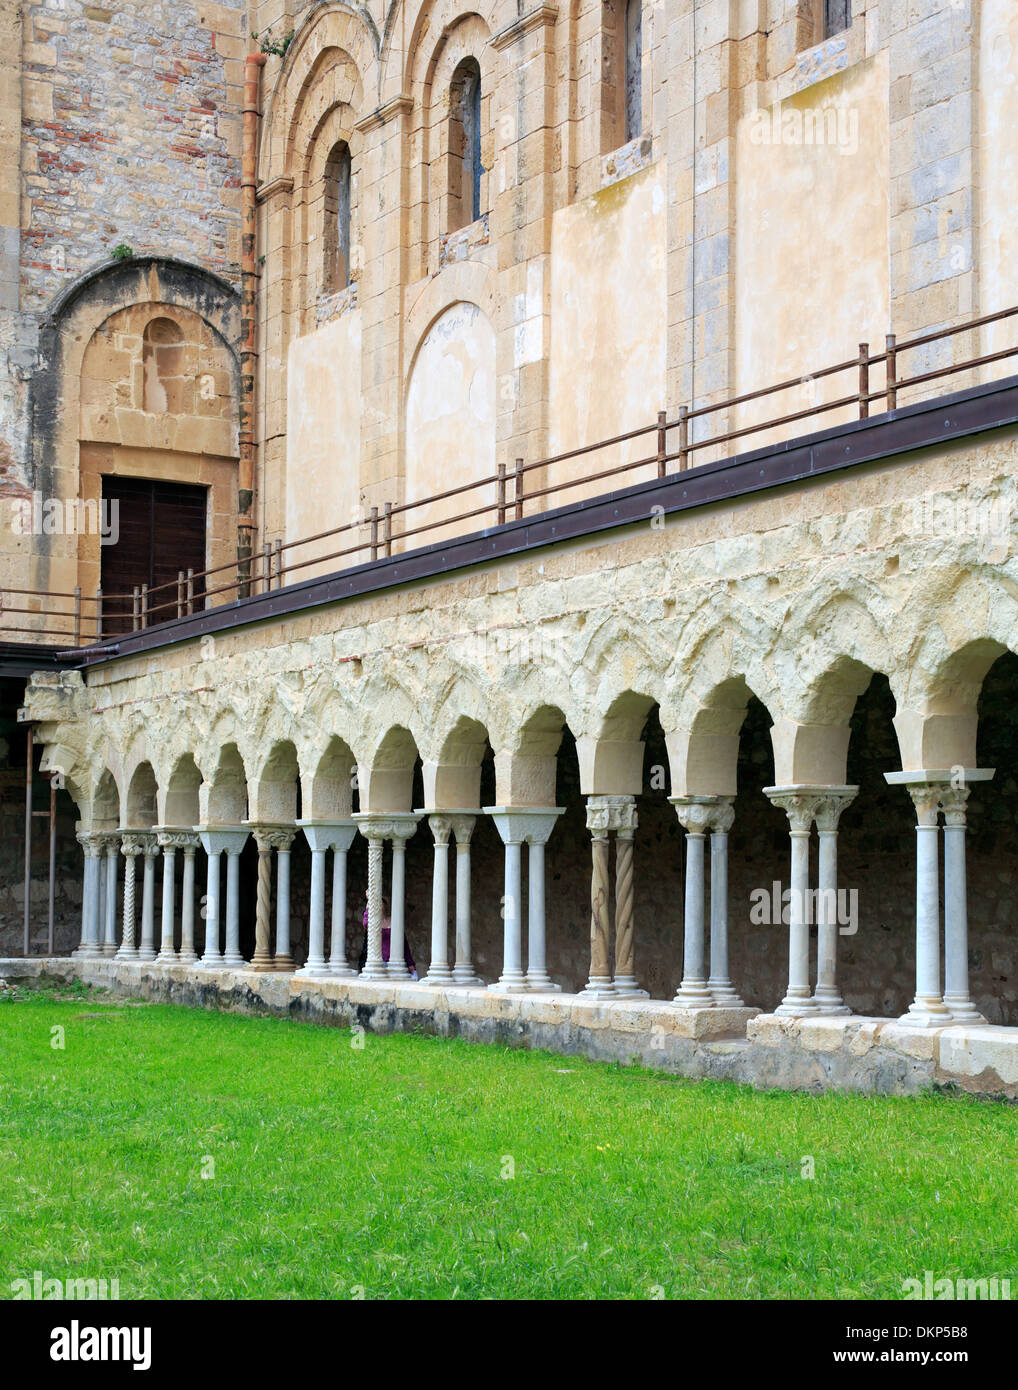 Cloister of Cefalu Cathedral, Cefalu, Sicily, Italy Stock Photo